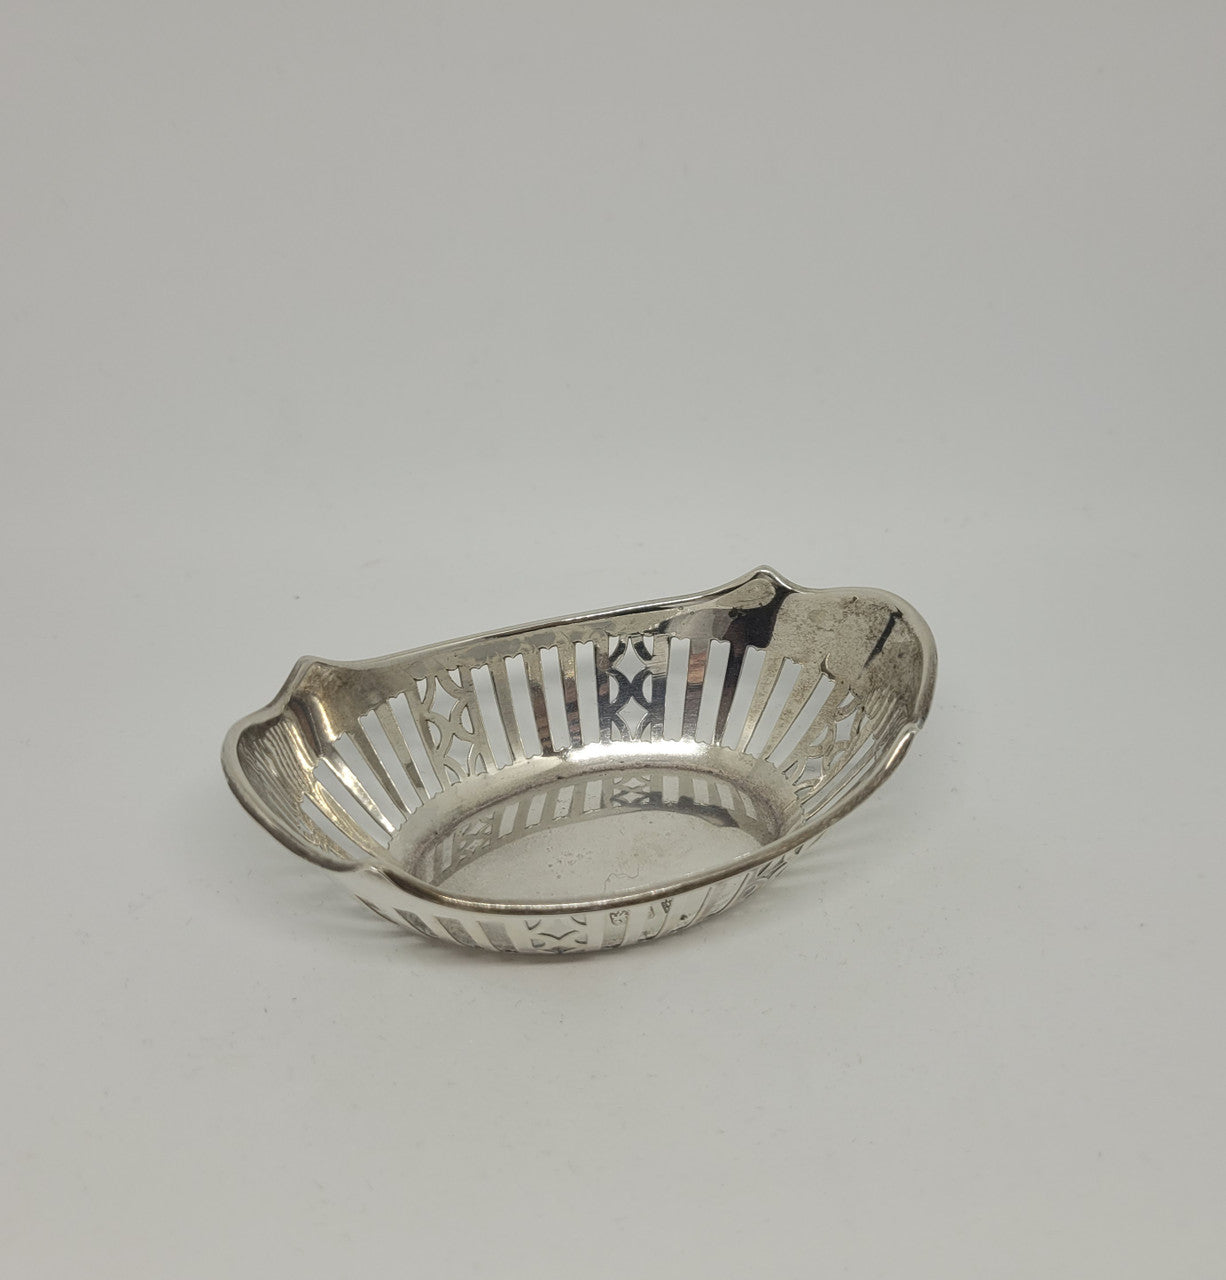 Beautiful sterling silver pin dish. Clearly marked Birmingham 1934. In very good original condition.